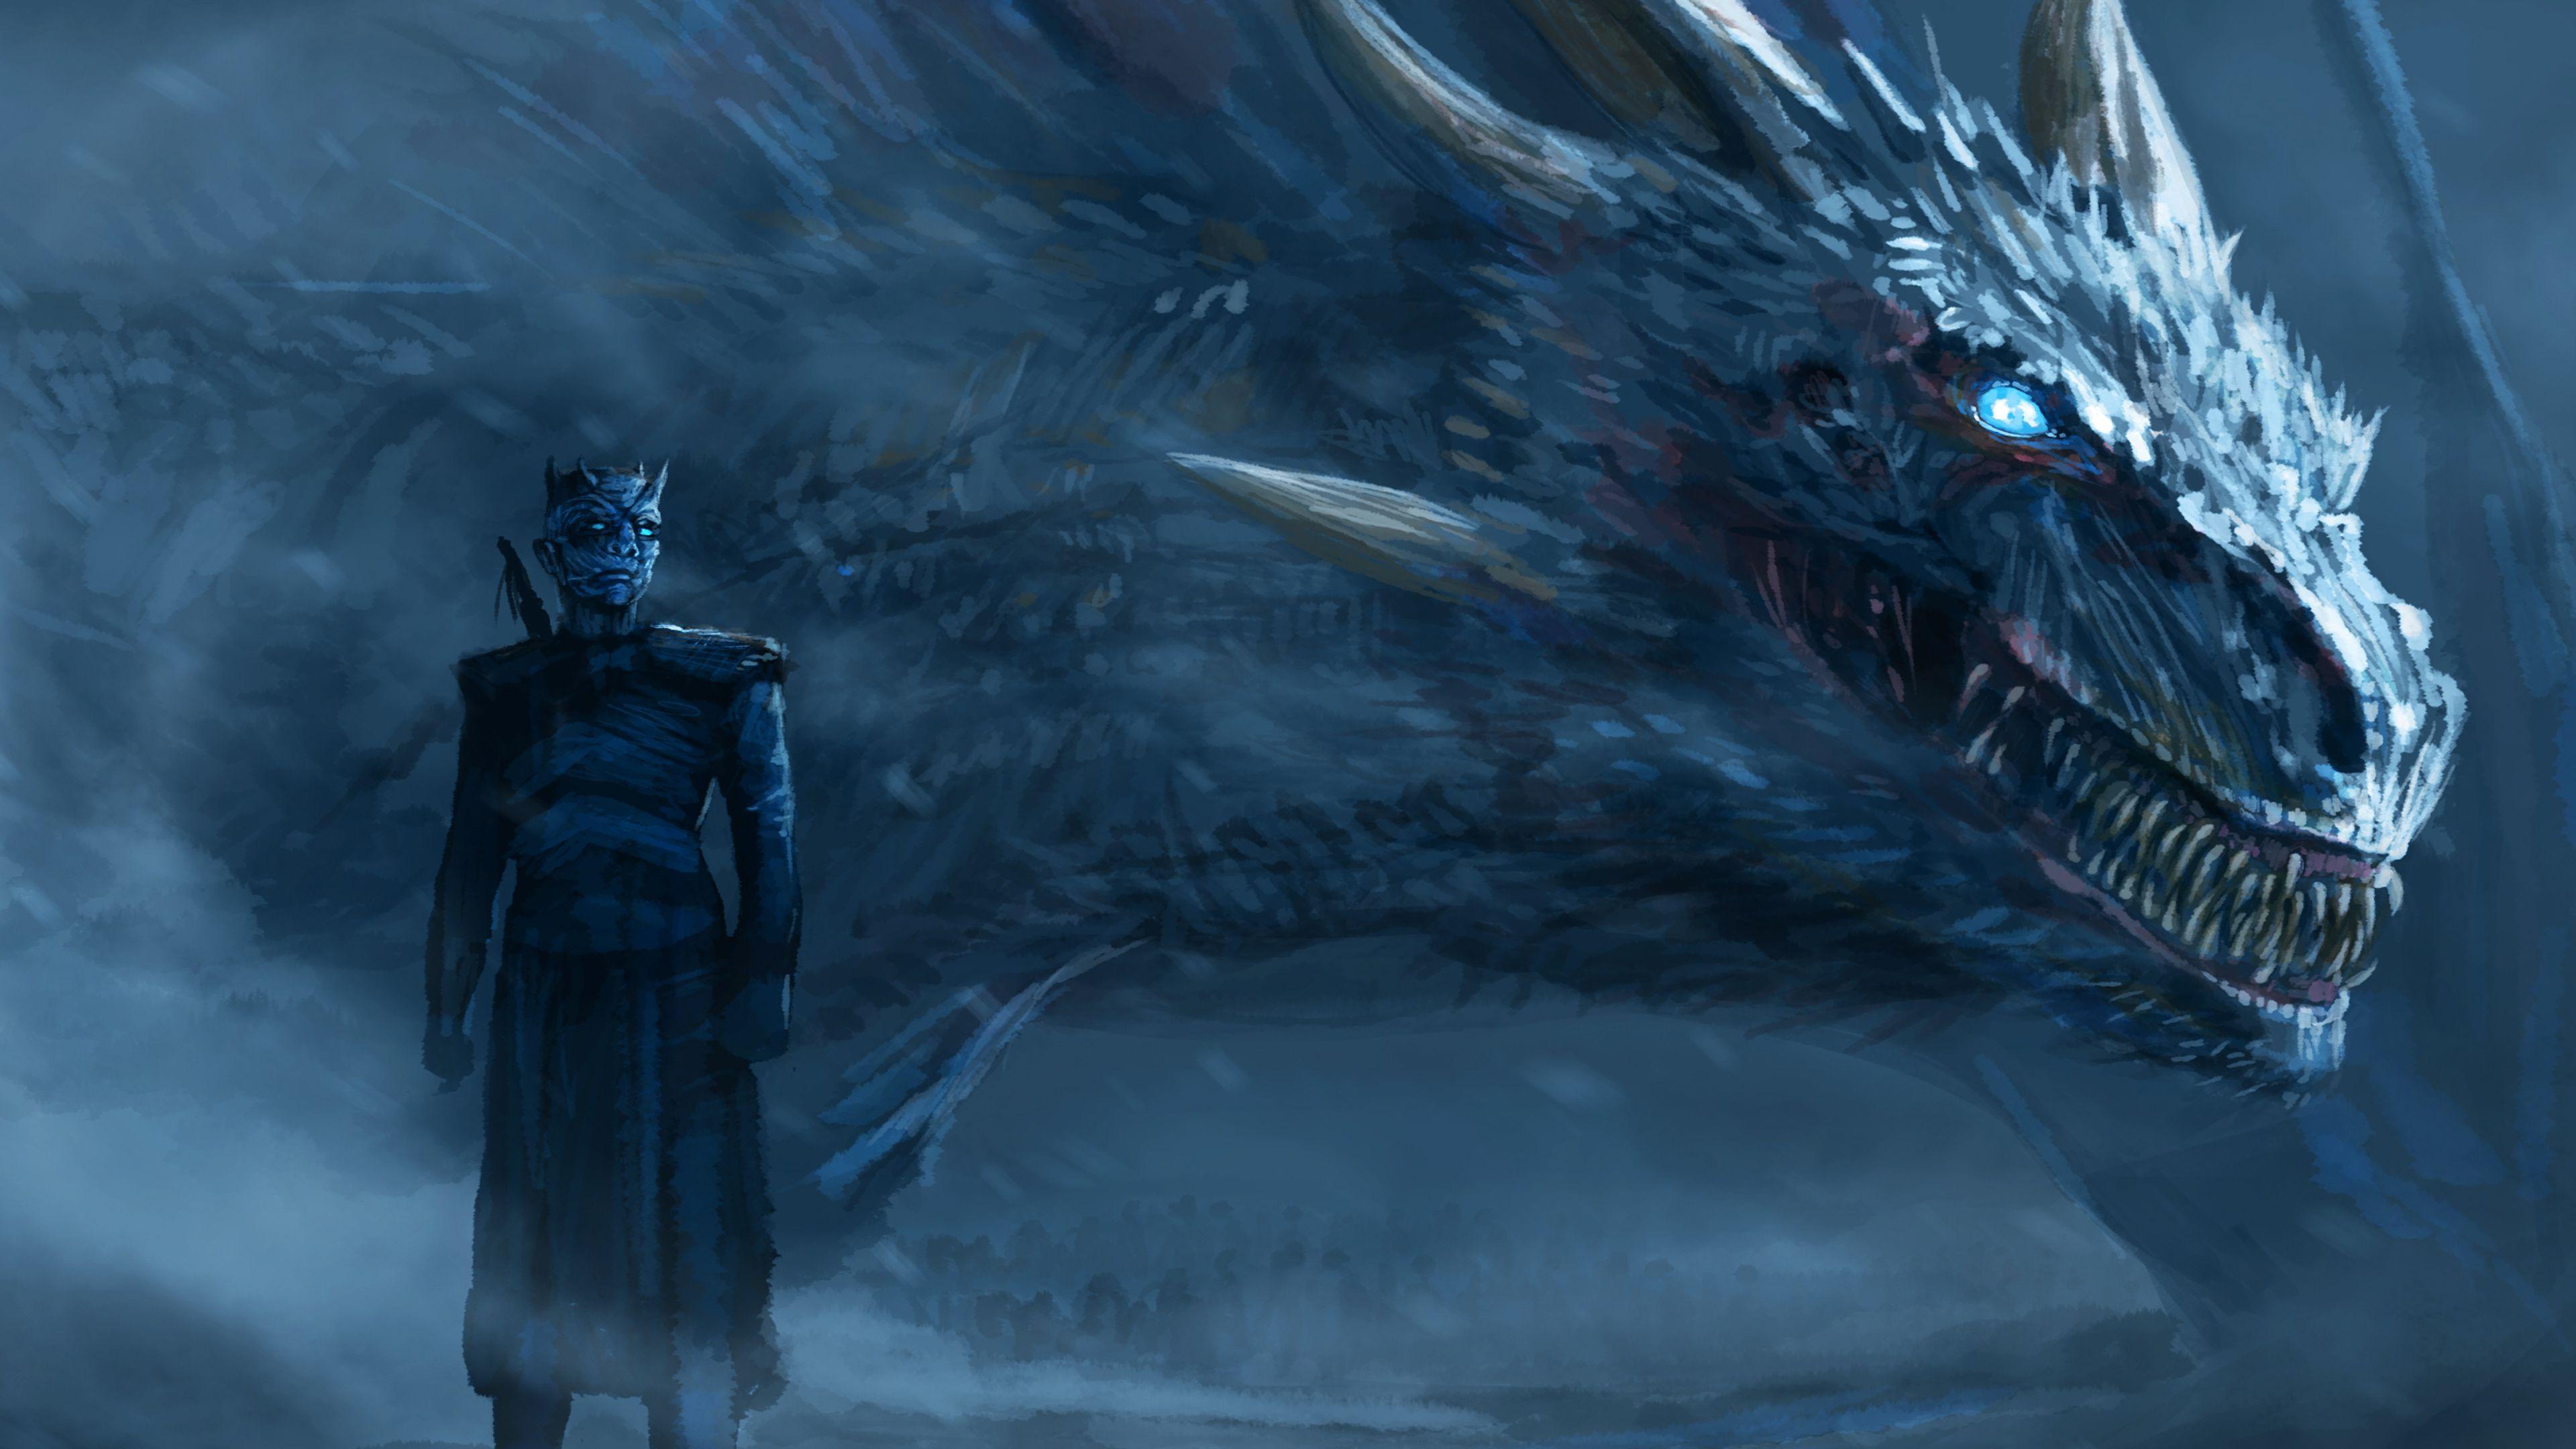 Game of Thrones Dragons Wallpapers.